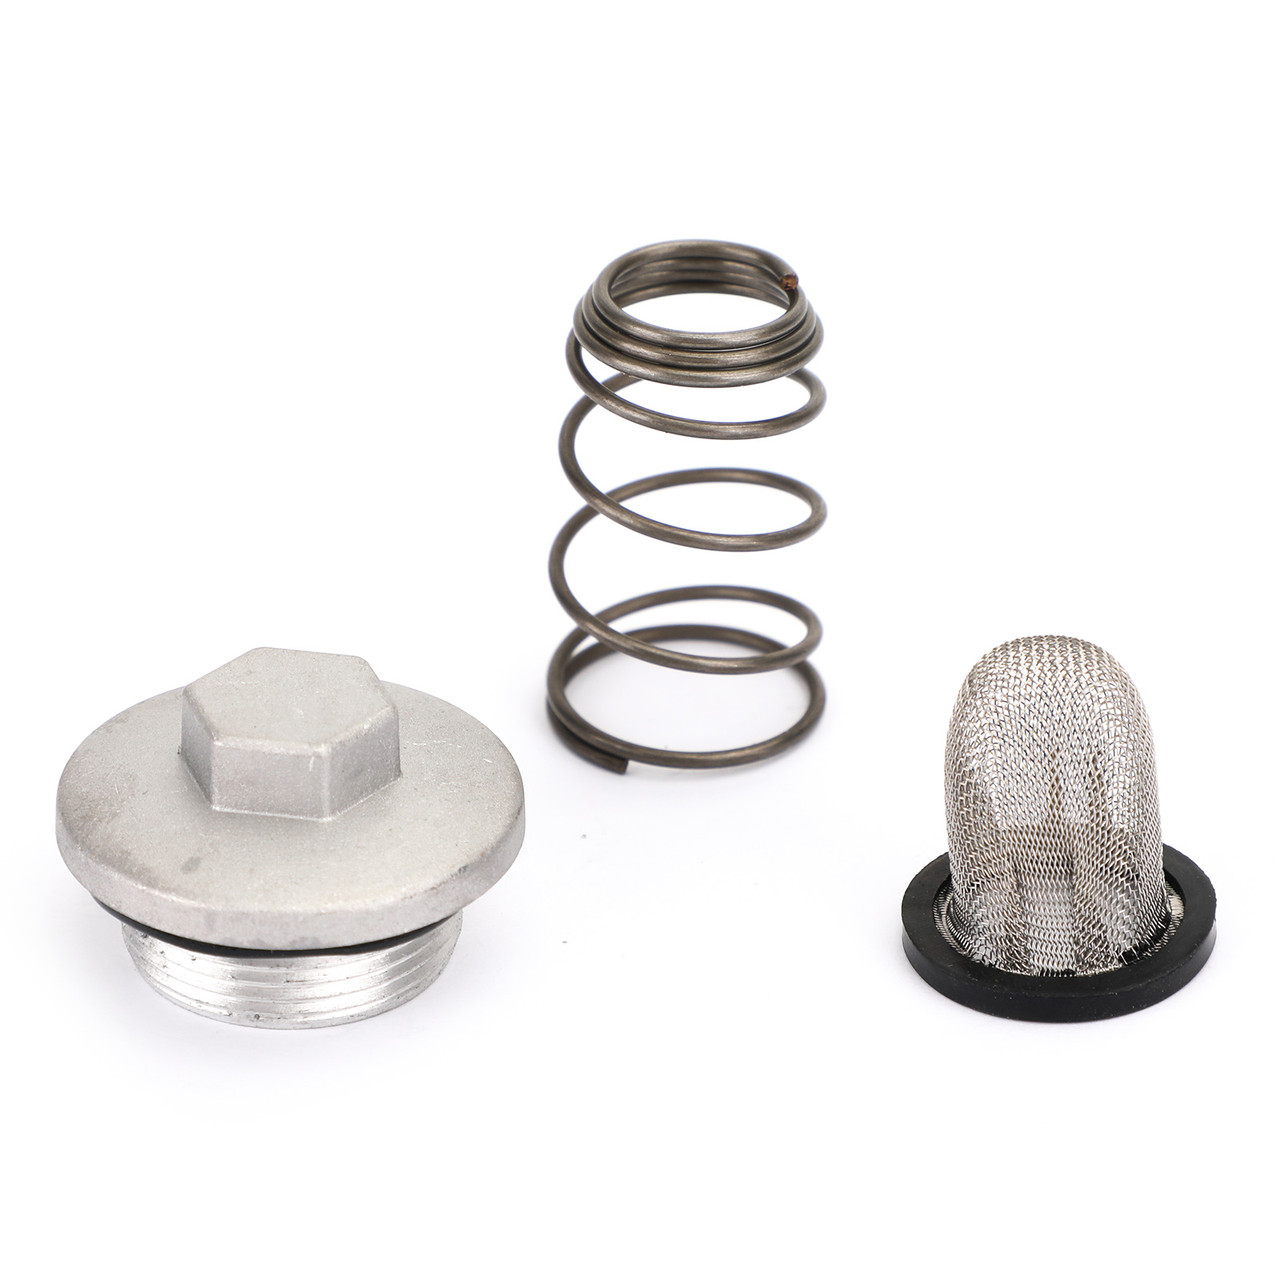 Oil Filter Drain Plug Set Fit For Chinese Scooter Moped GY6 50cc 125cc 150cc